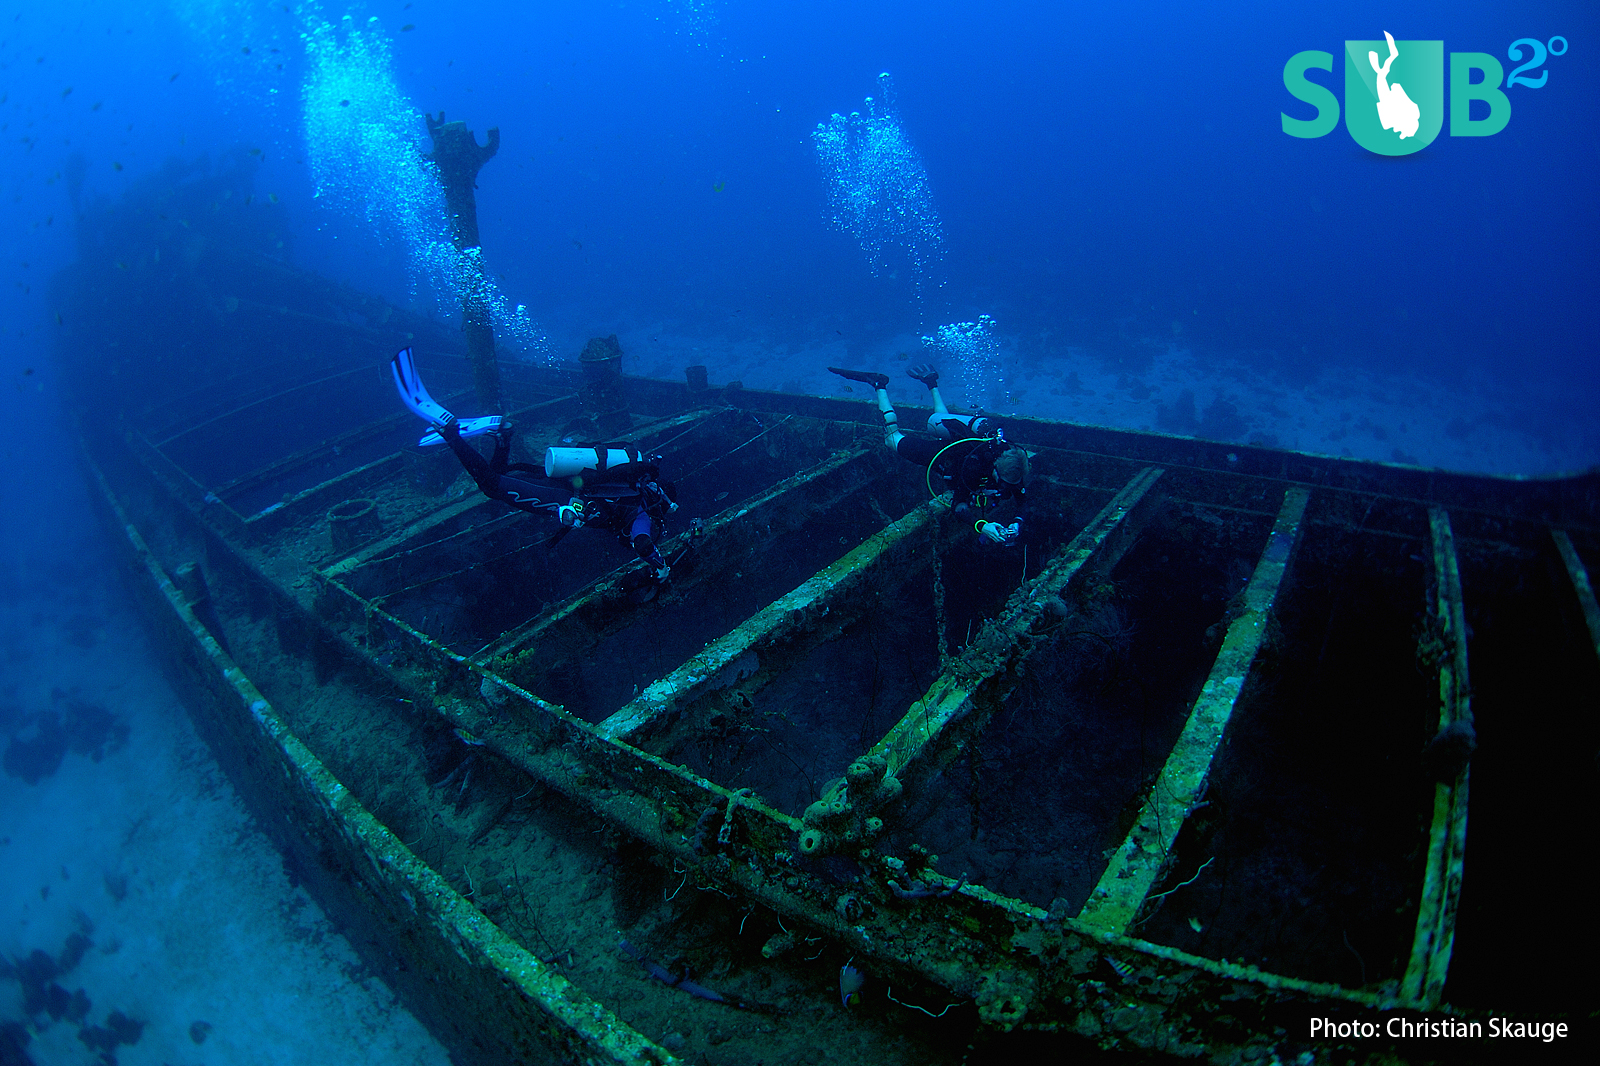 A wreck shows itself in blue and green colors at depth, unless you bring an artificial light source.